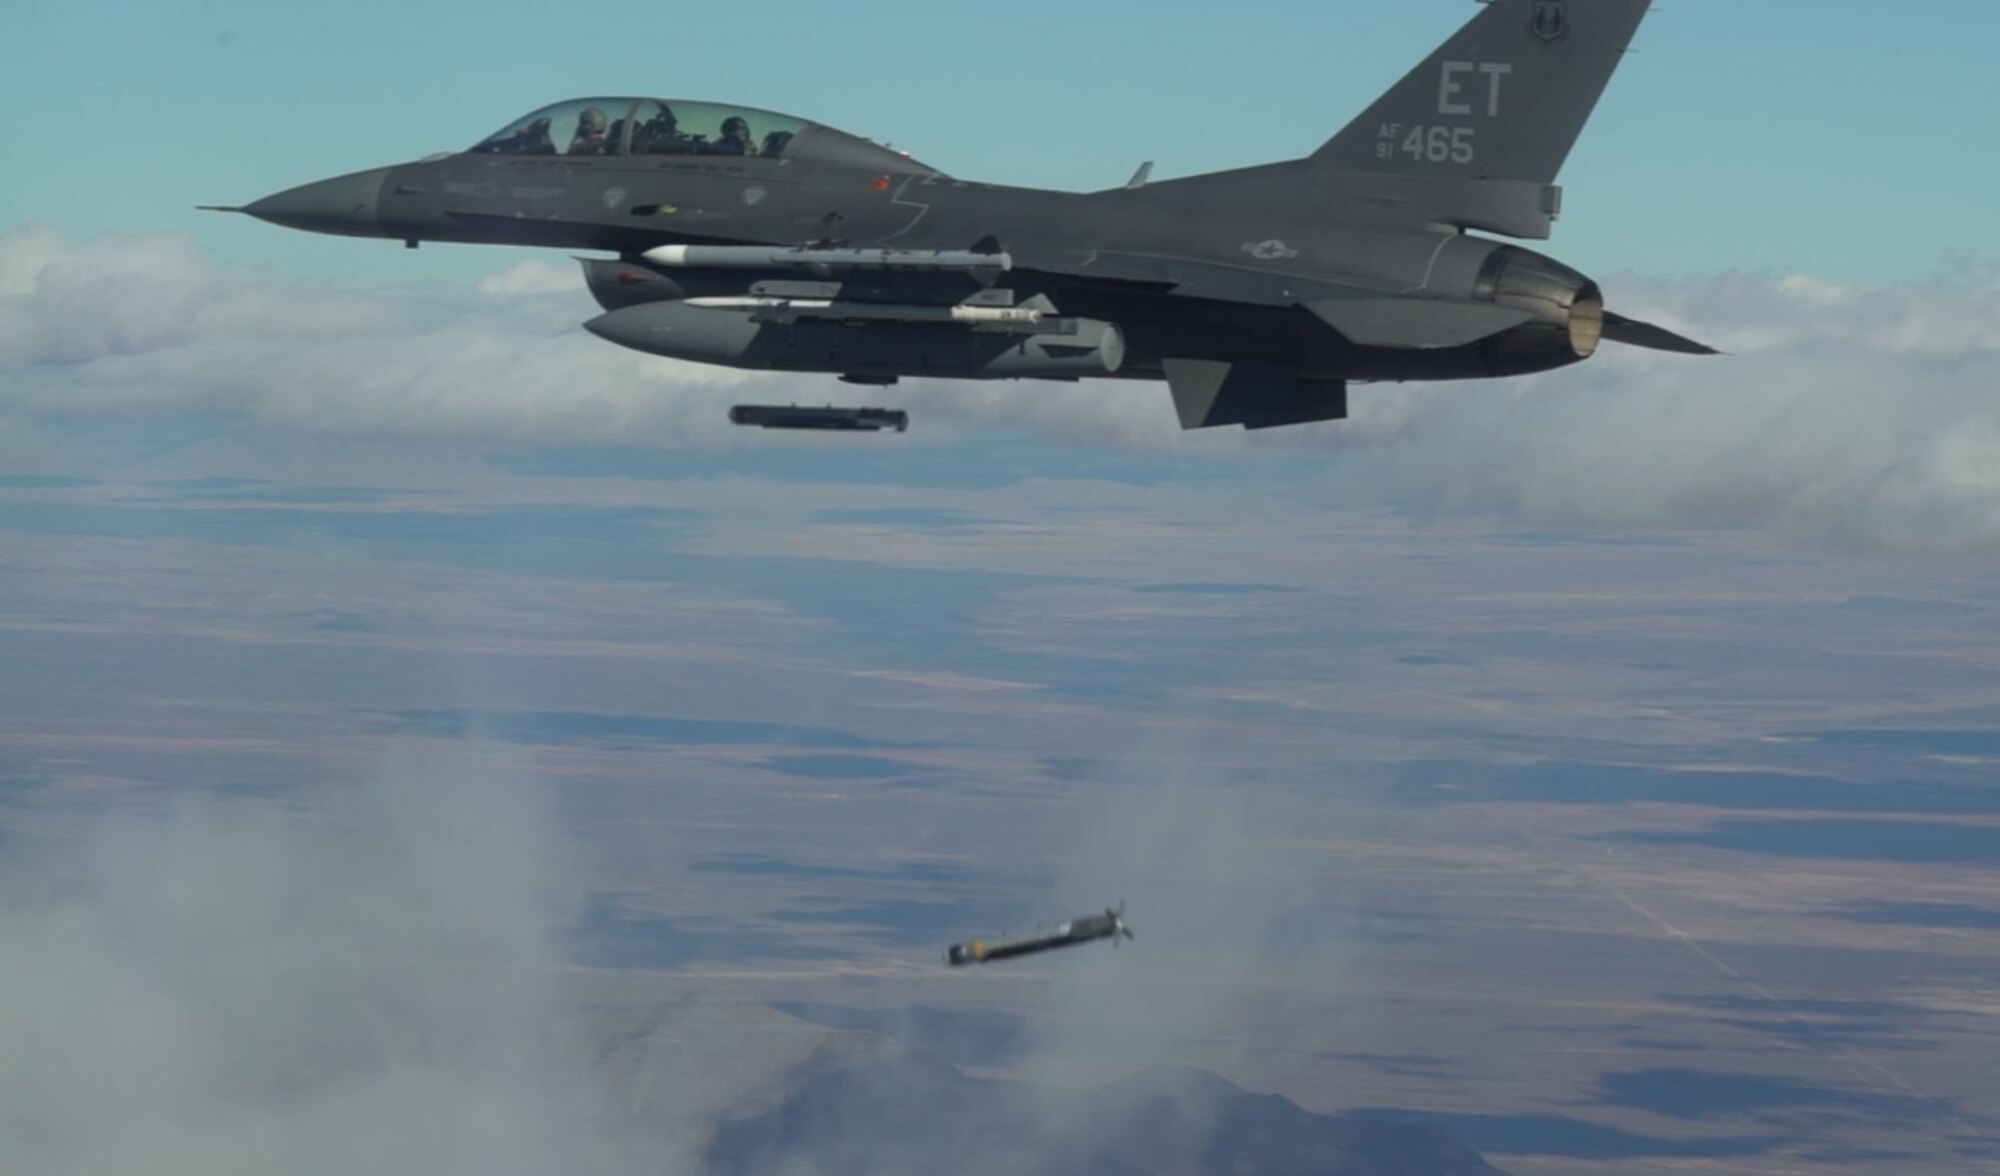 Collaborative Small Diameter Bombs (CSDBs) are launched from the wing of an F-16 fighter from the Air Force Test Center’s 96th Test Wing at Eglin AFB. Four of the bombs were dropped during the second flight demonstration of the Air Force Golden Horde Vanguard on February 19th. (Courtesy photo)